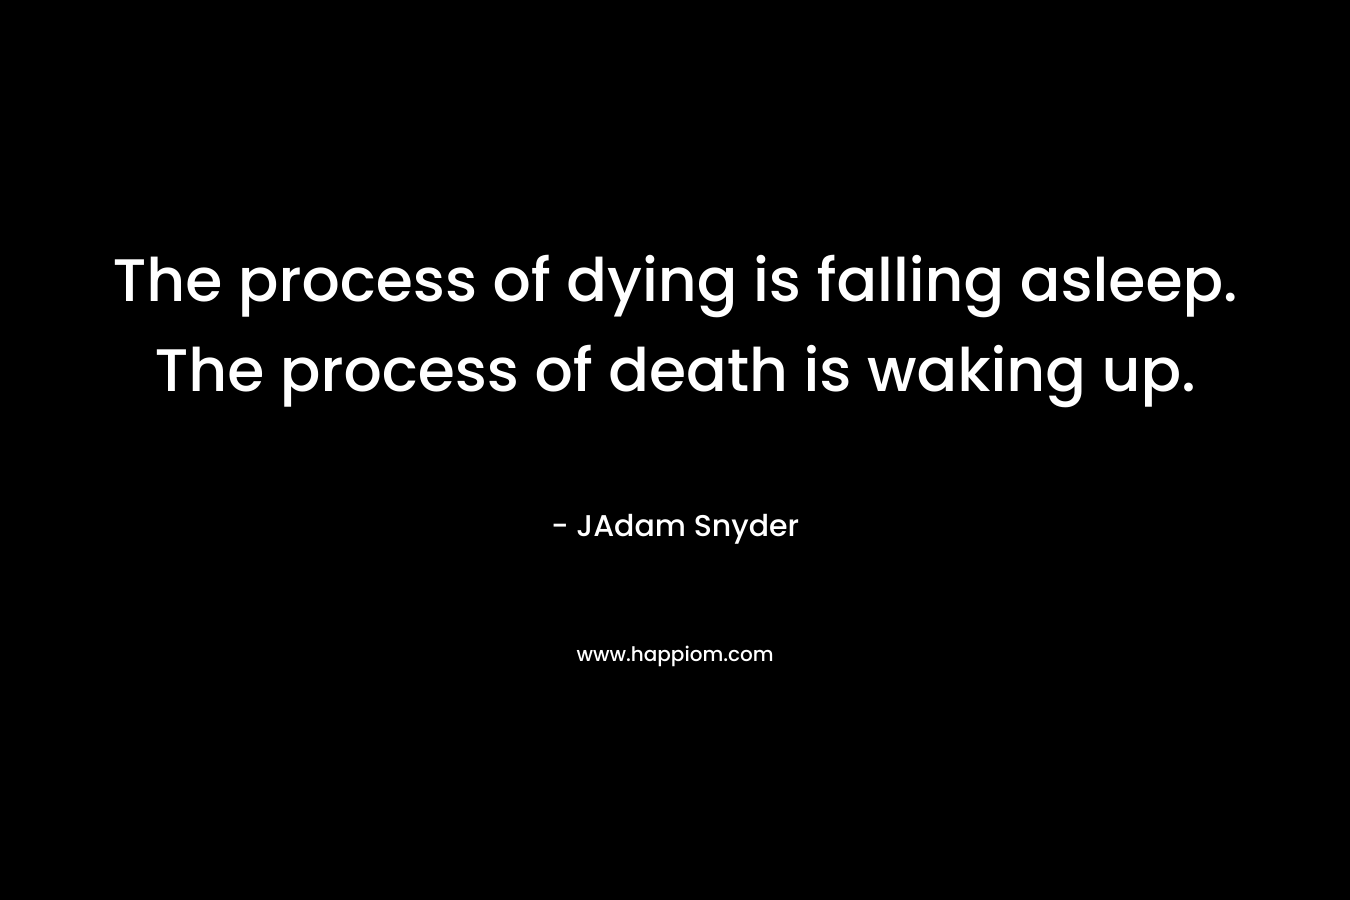 The process of dying is falling asleep. The process of death is waking up.